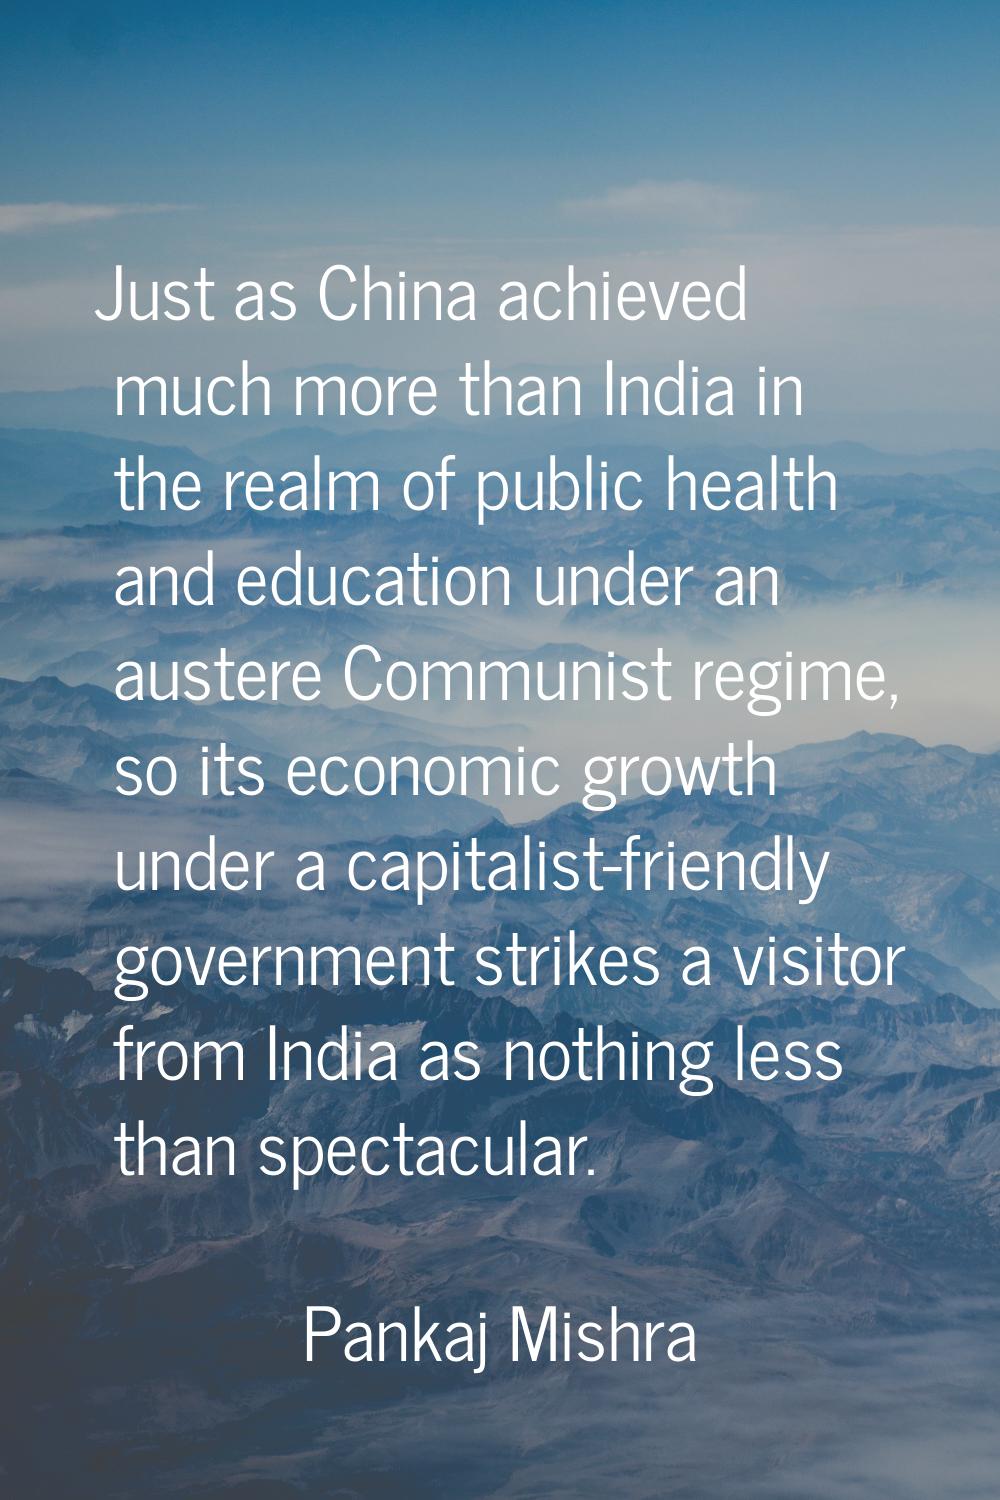 Just as China achieved much more than India in the realm of public health and education under an au